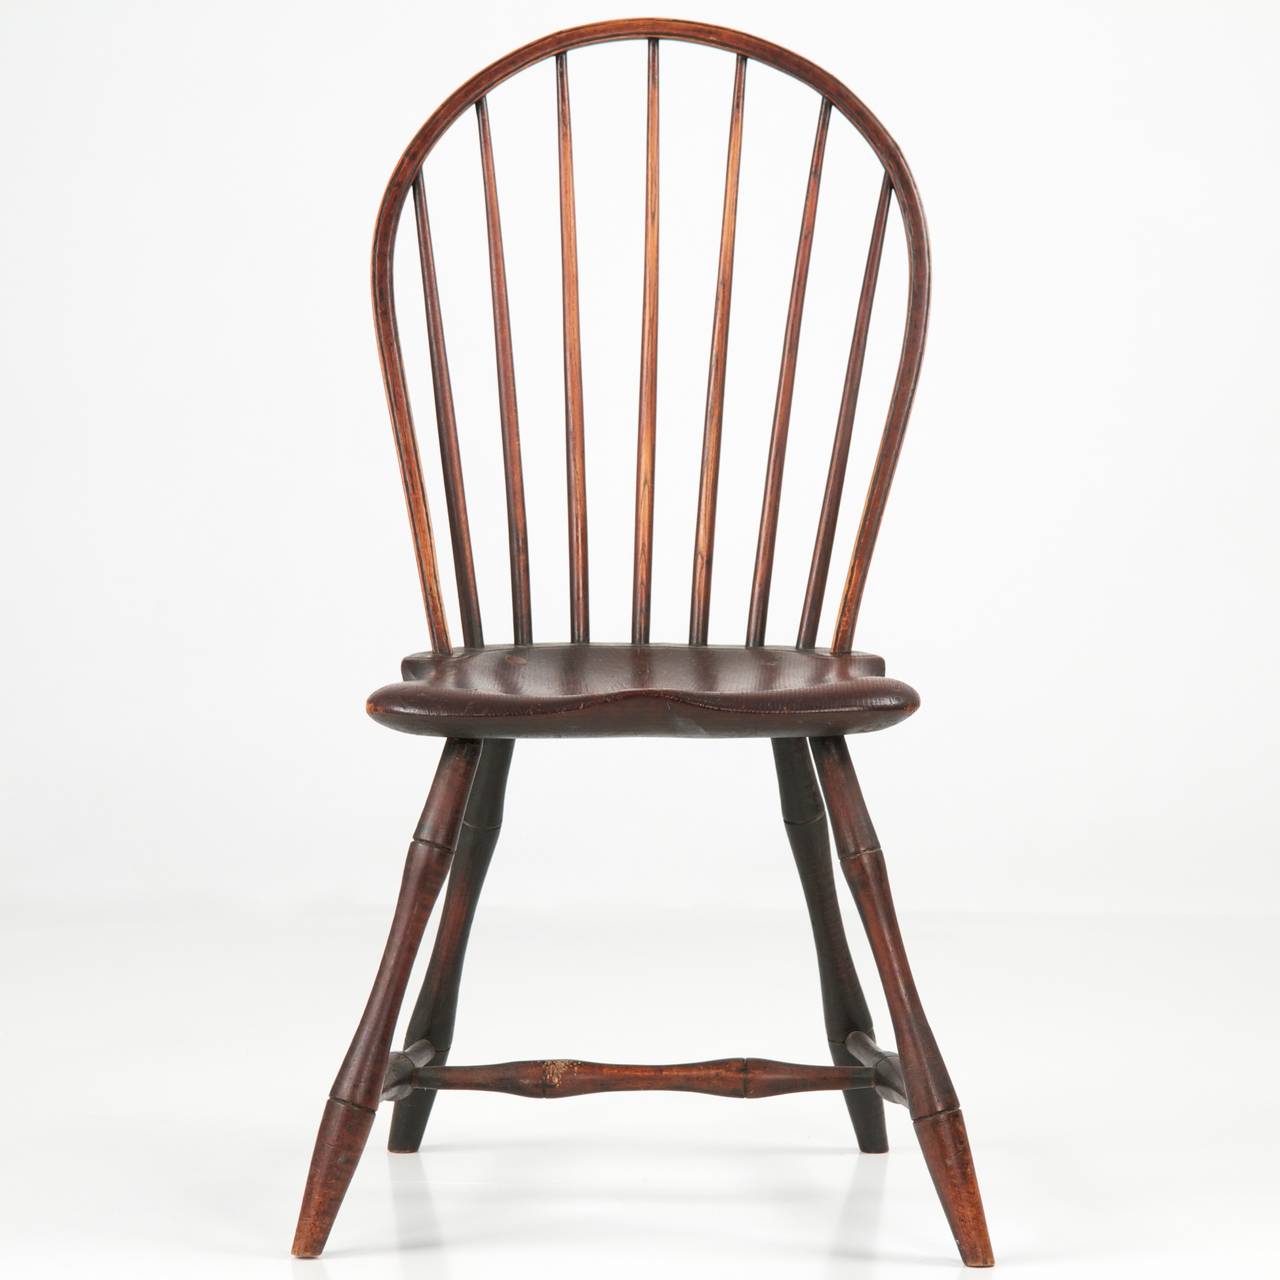 A very well preserved piece of early 19th century material culture, this fine American Bowback Windsor side chair originates from Pennsylvania during the first years of the century, probably the outskirts of Philadelphia c. 1800-10.  Retaining an